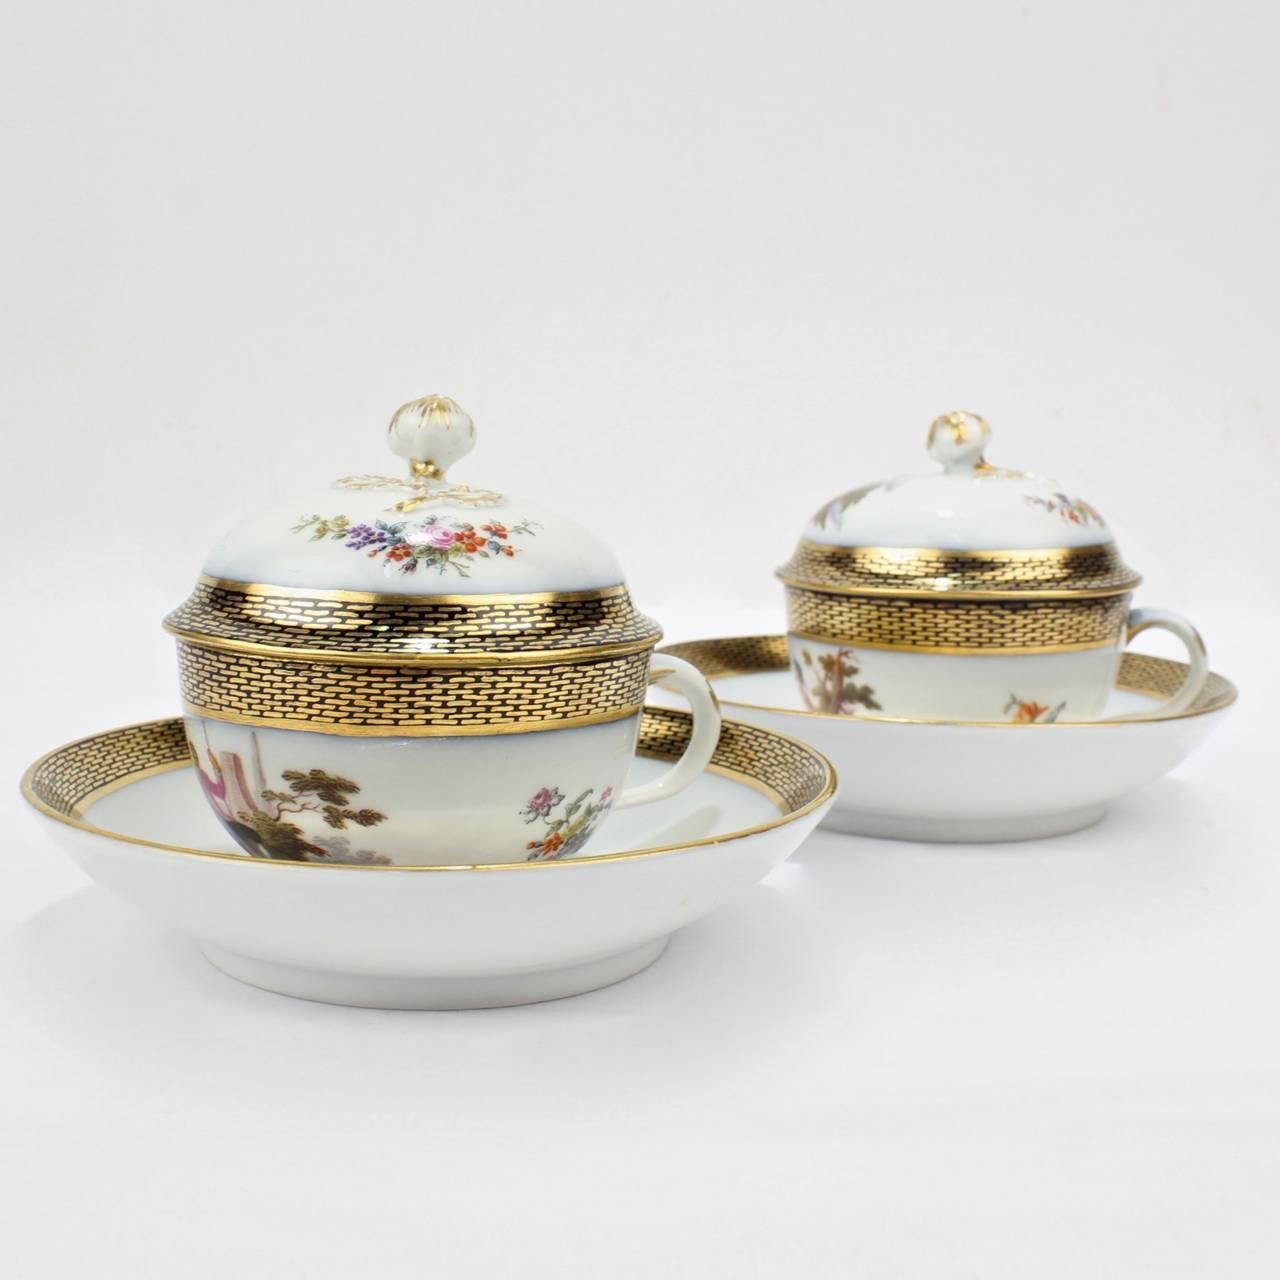 Pair of Antique Meissen Porcelain Covered Tea Cups and Saucers, 19th Century 1